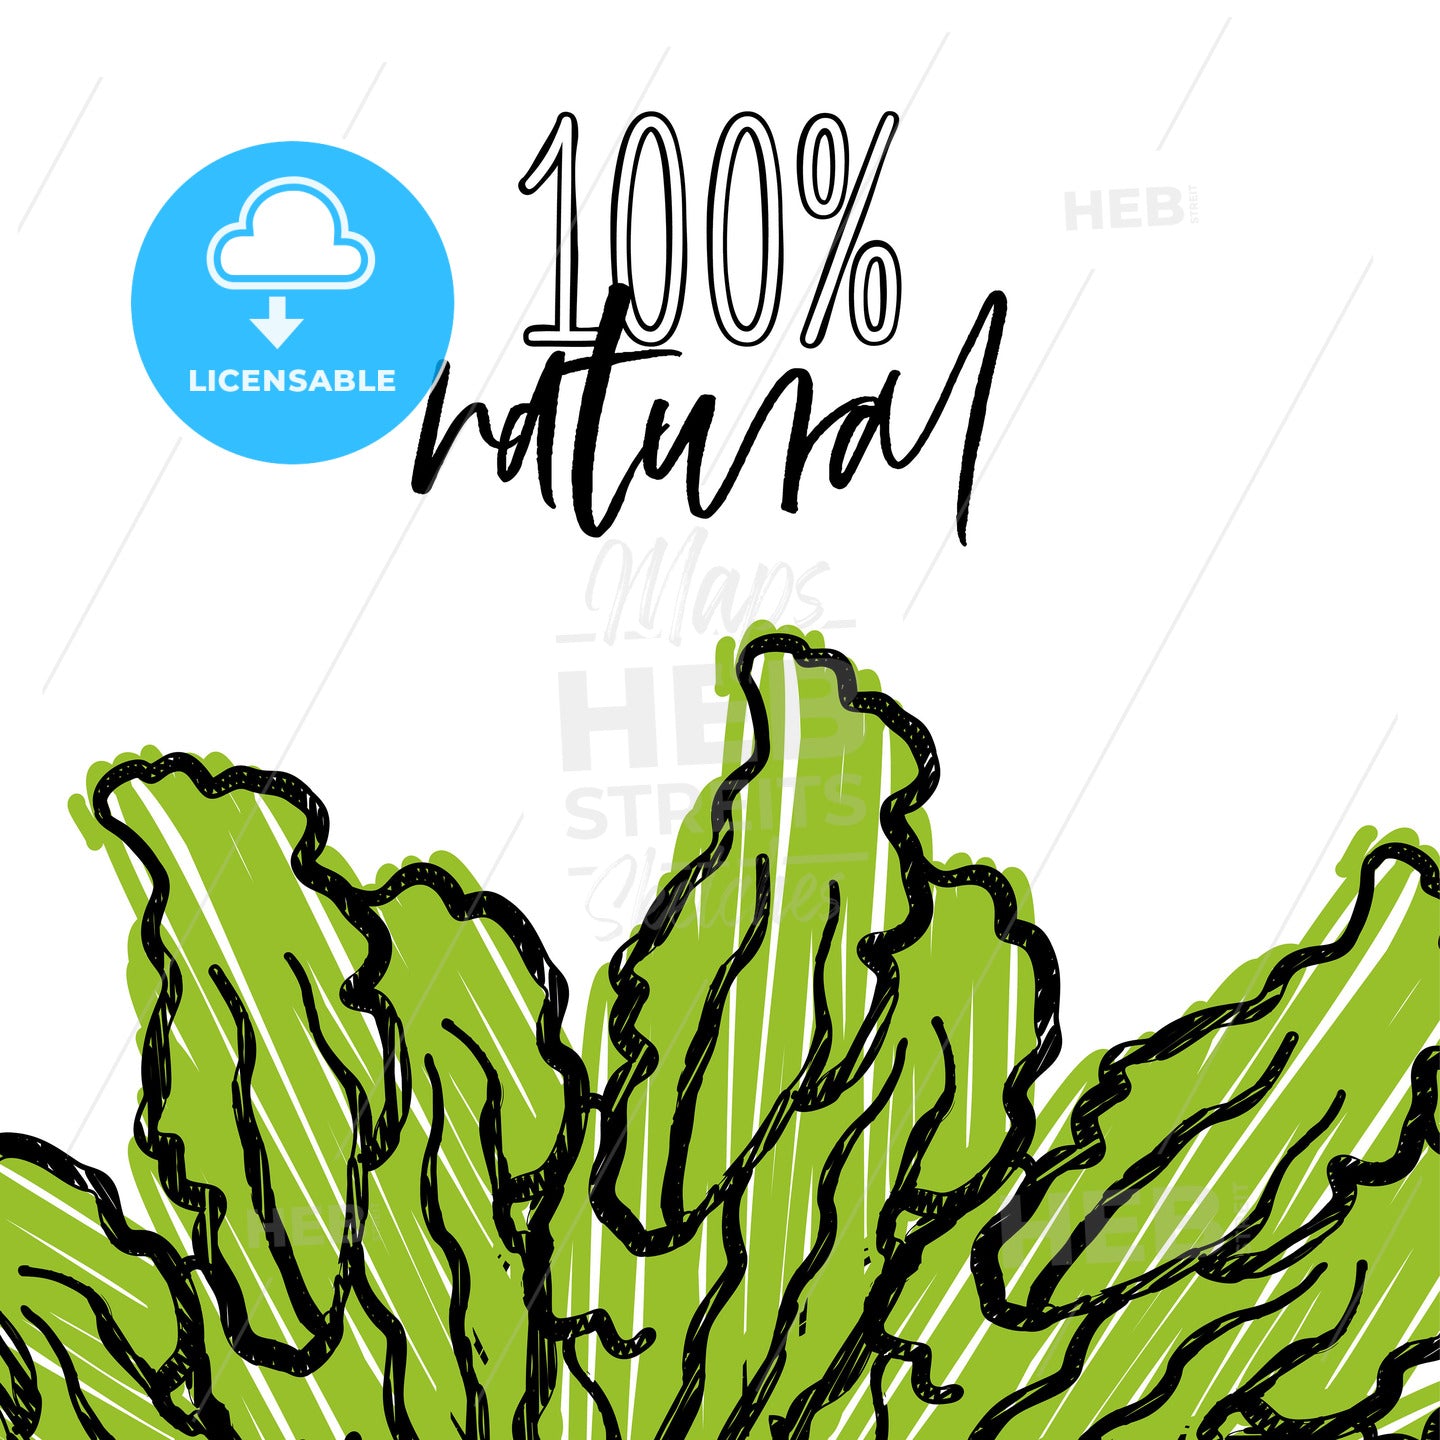 100% natural lettering and Lettuce advertising template – instant download